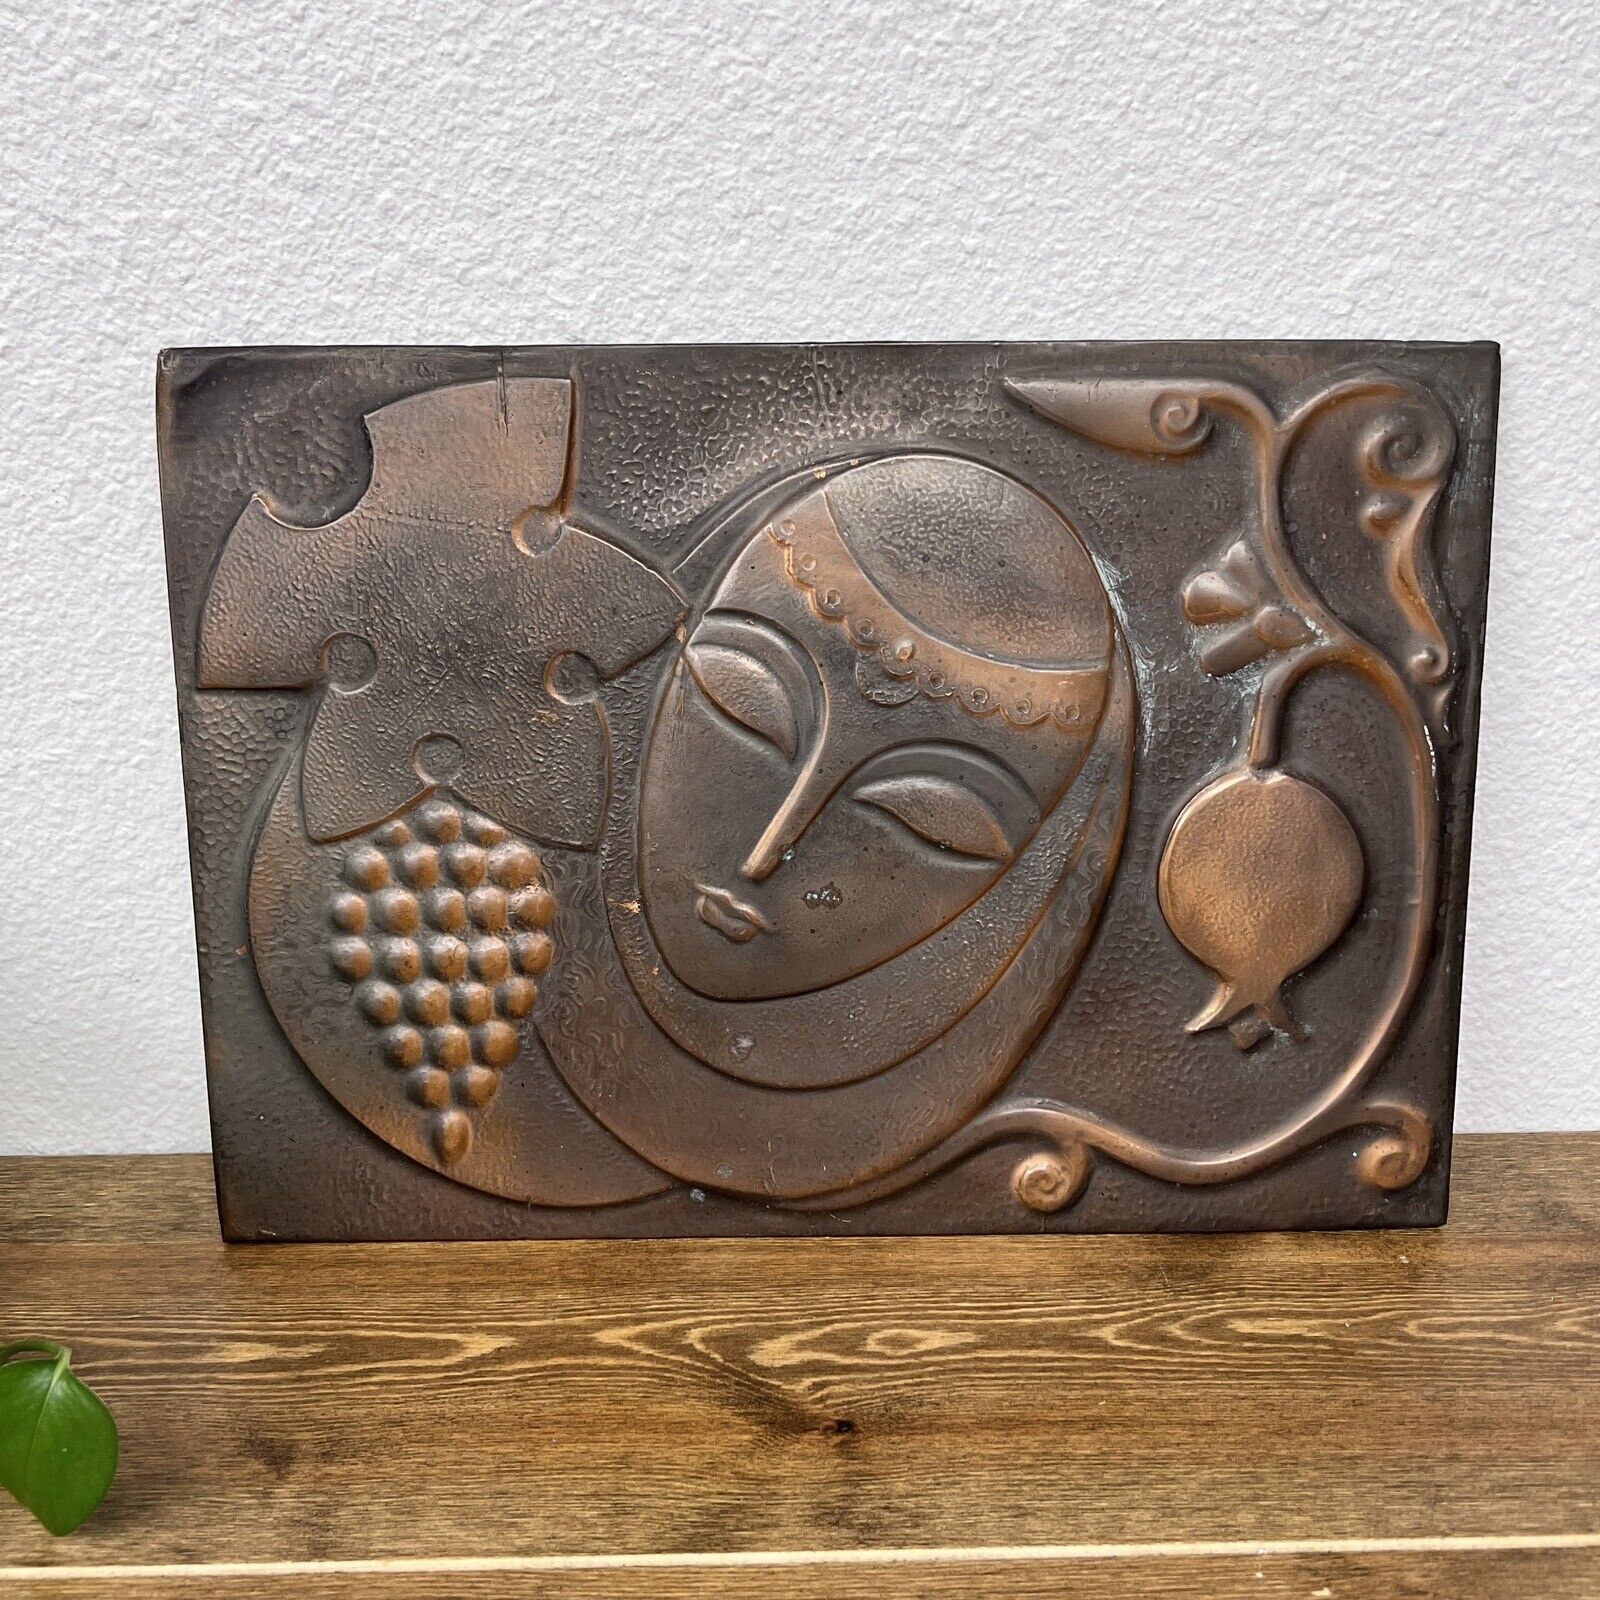 Vintage 1970's Embossed Copper Wall Decor of Armenian Woman & Grapes